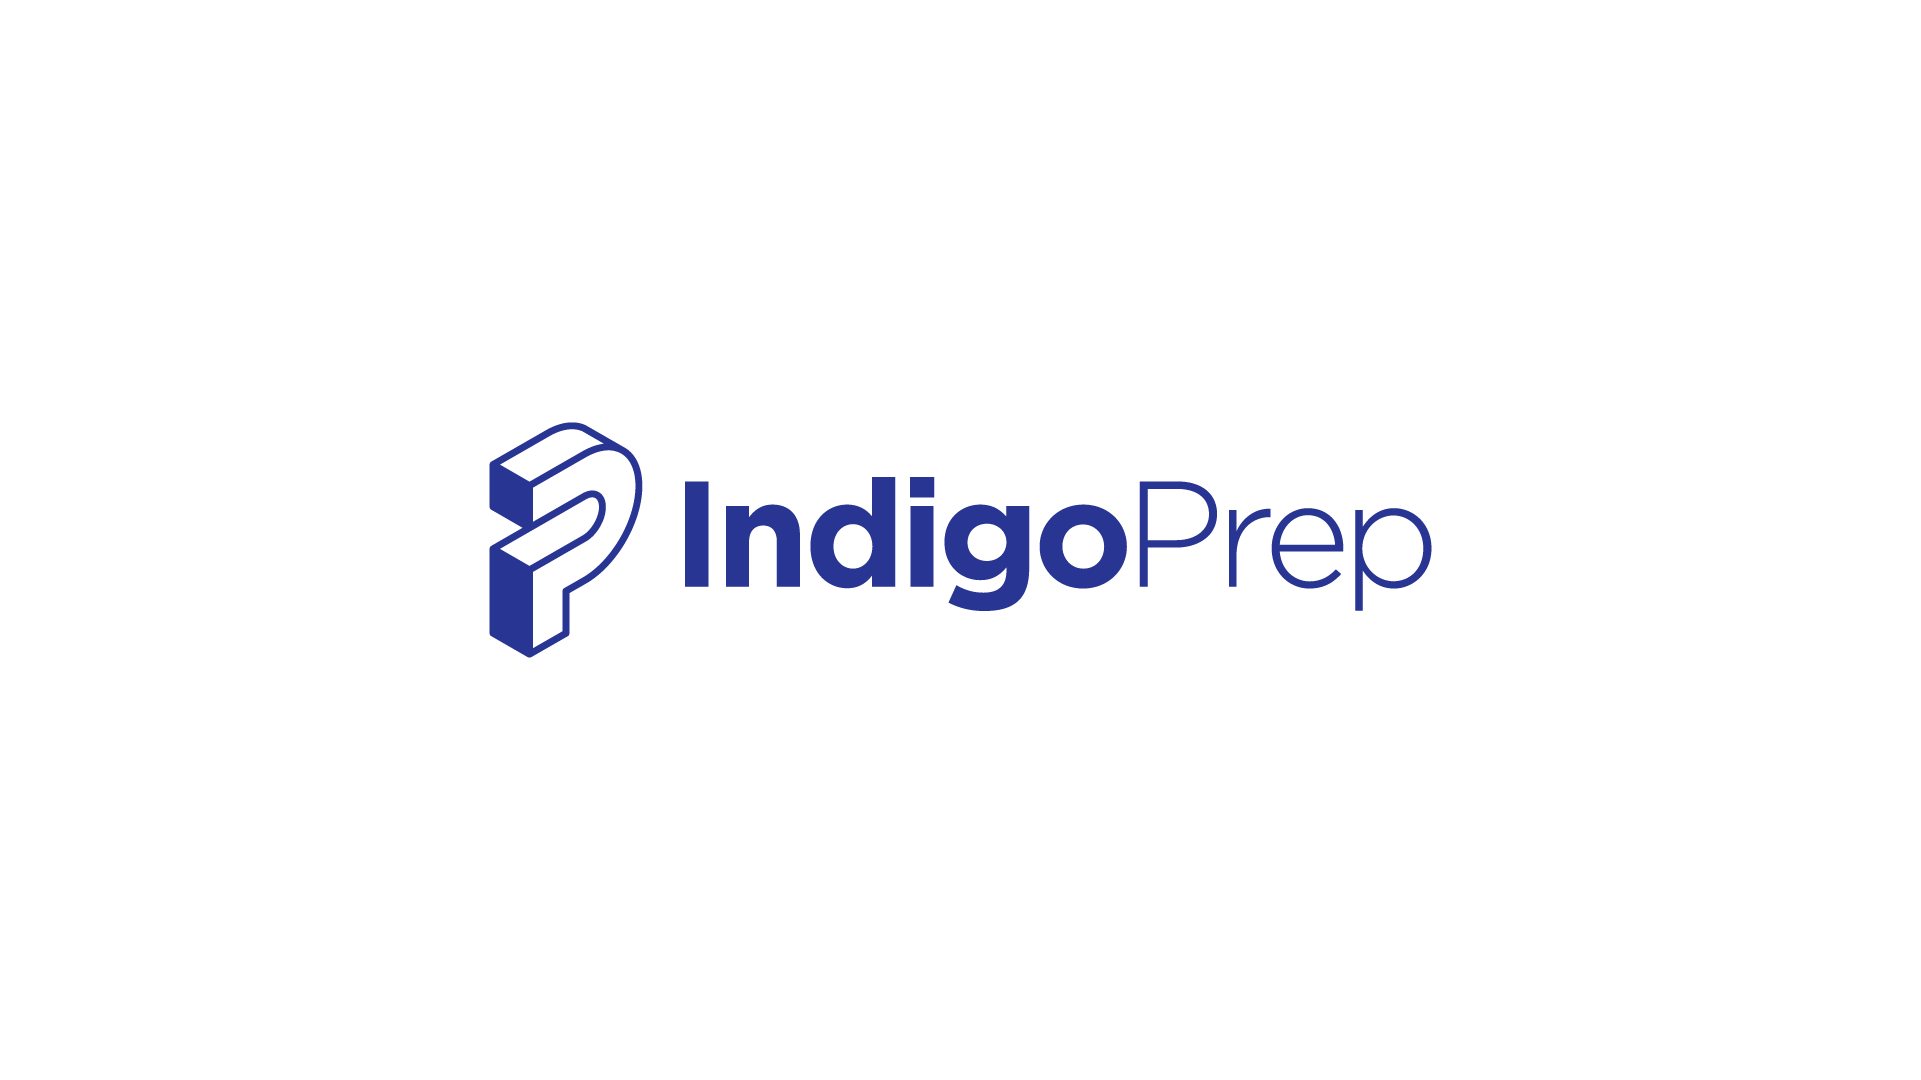 IndigoPrep - Educational Platform logo, 'IP' letters connected in a 3D shape, symbolizing educational connectivity and excellence